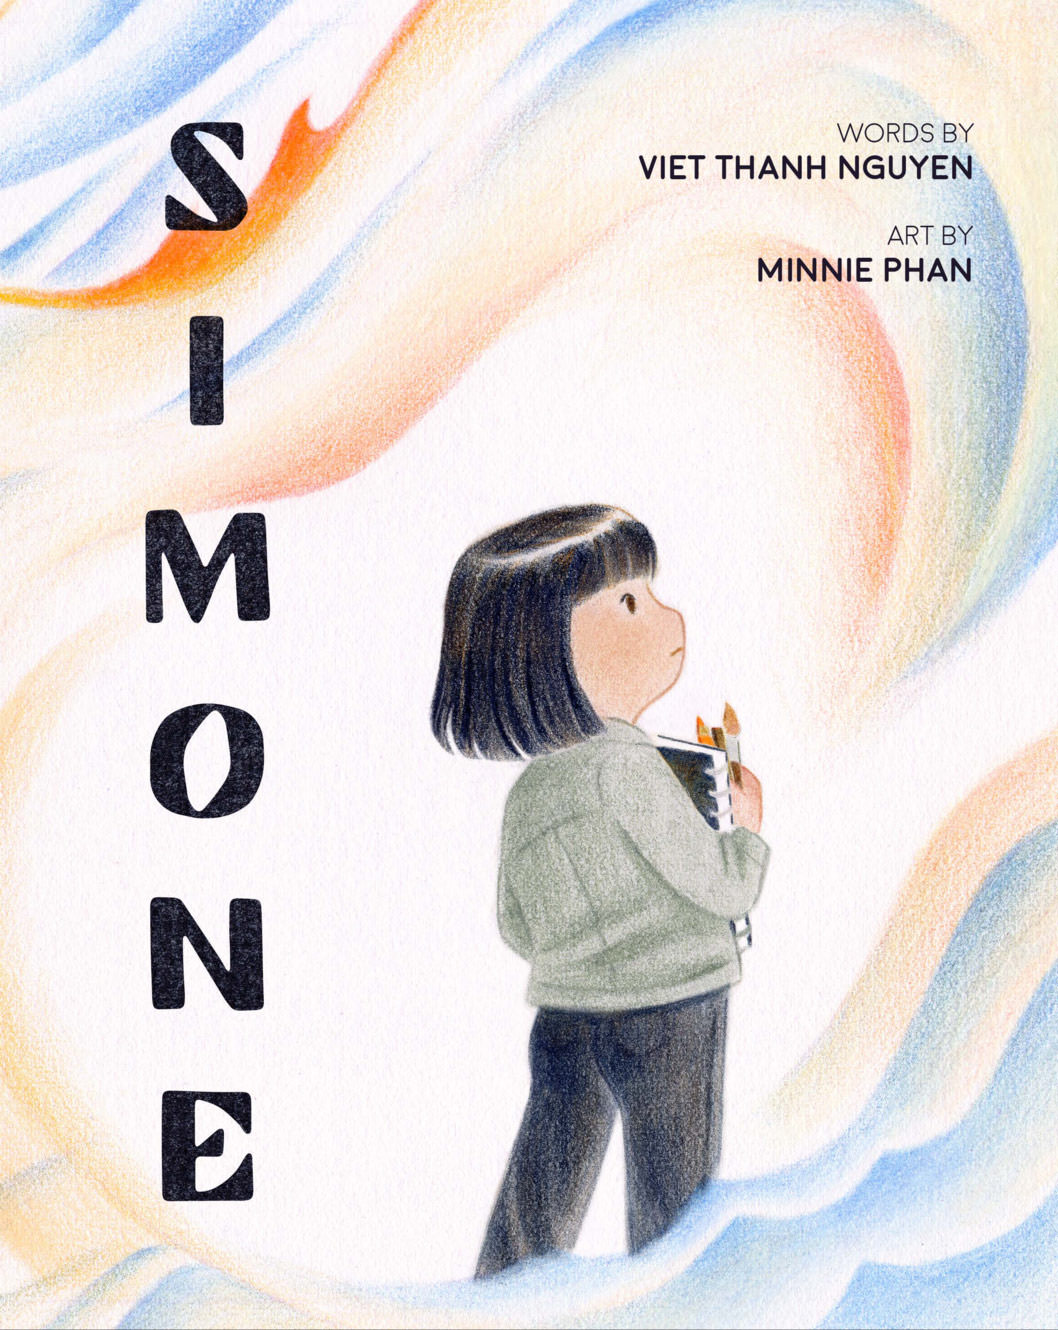 Simone by Viet Thanh Nguyen book cover